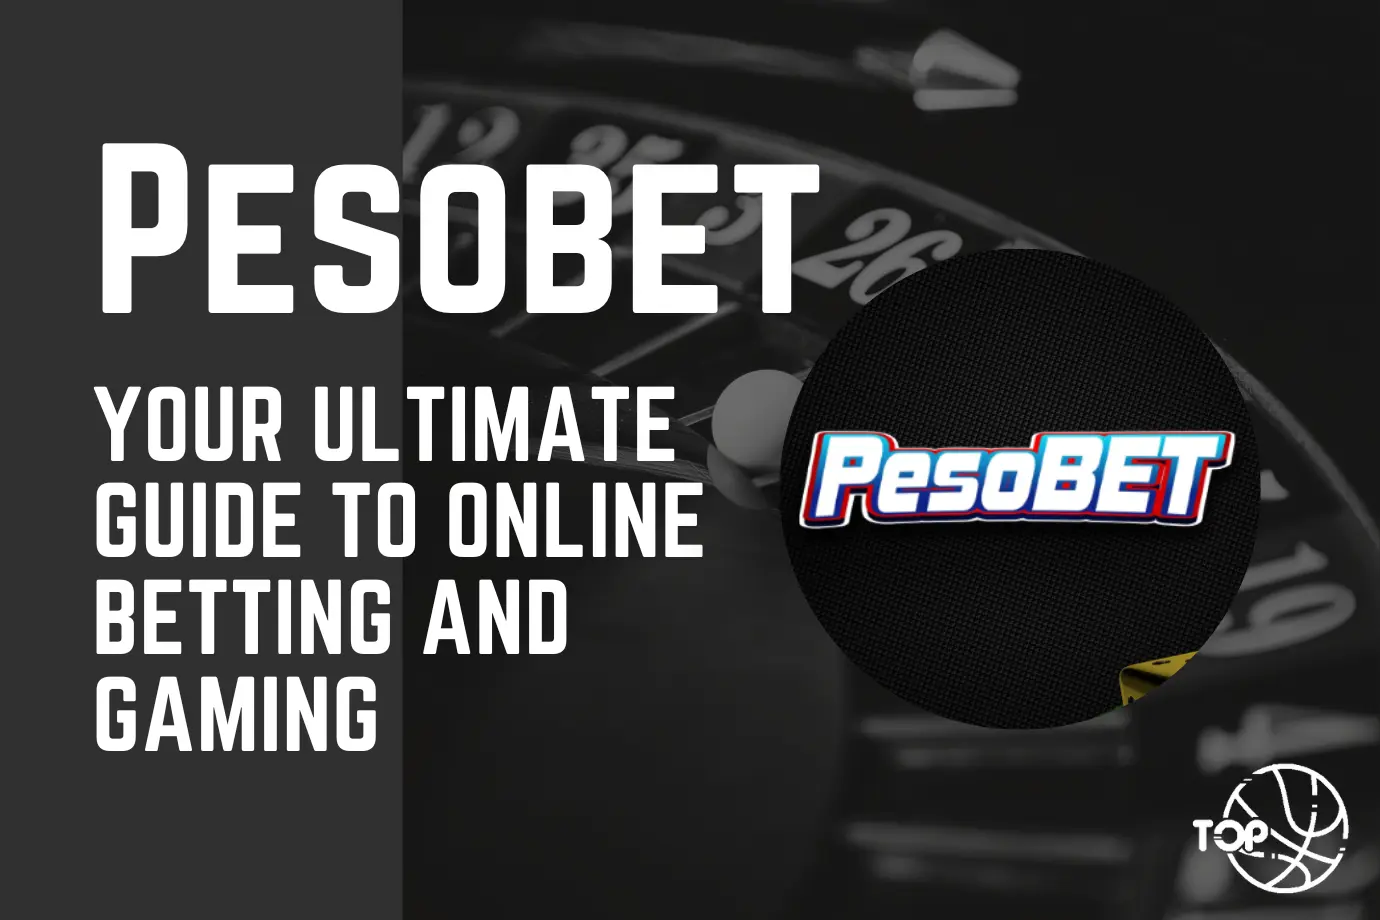 Pesobet: Your Ultimate Guide to Online Betting and Gaming